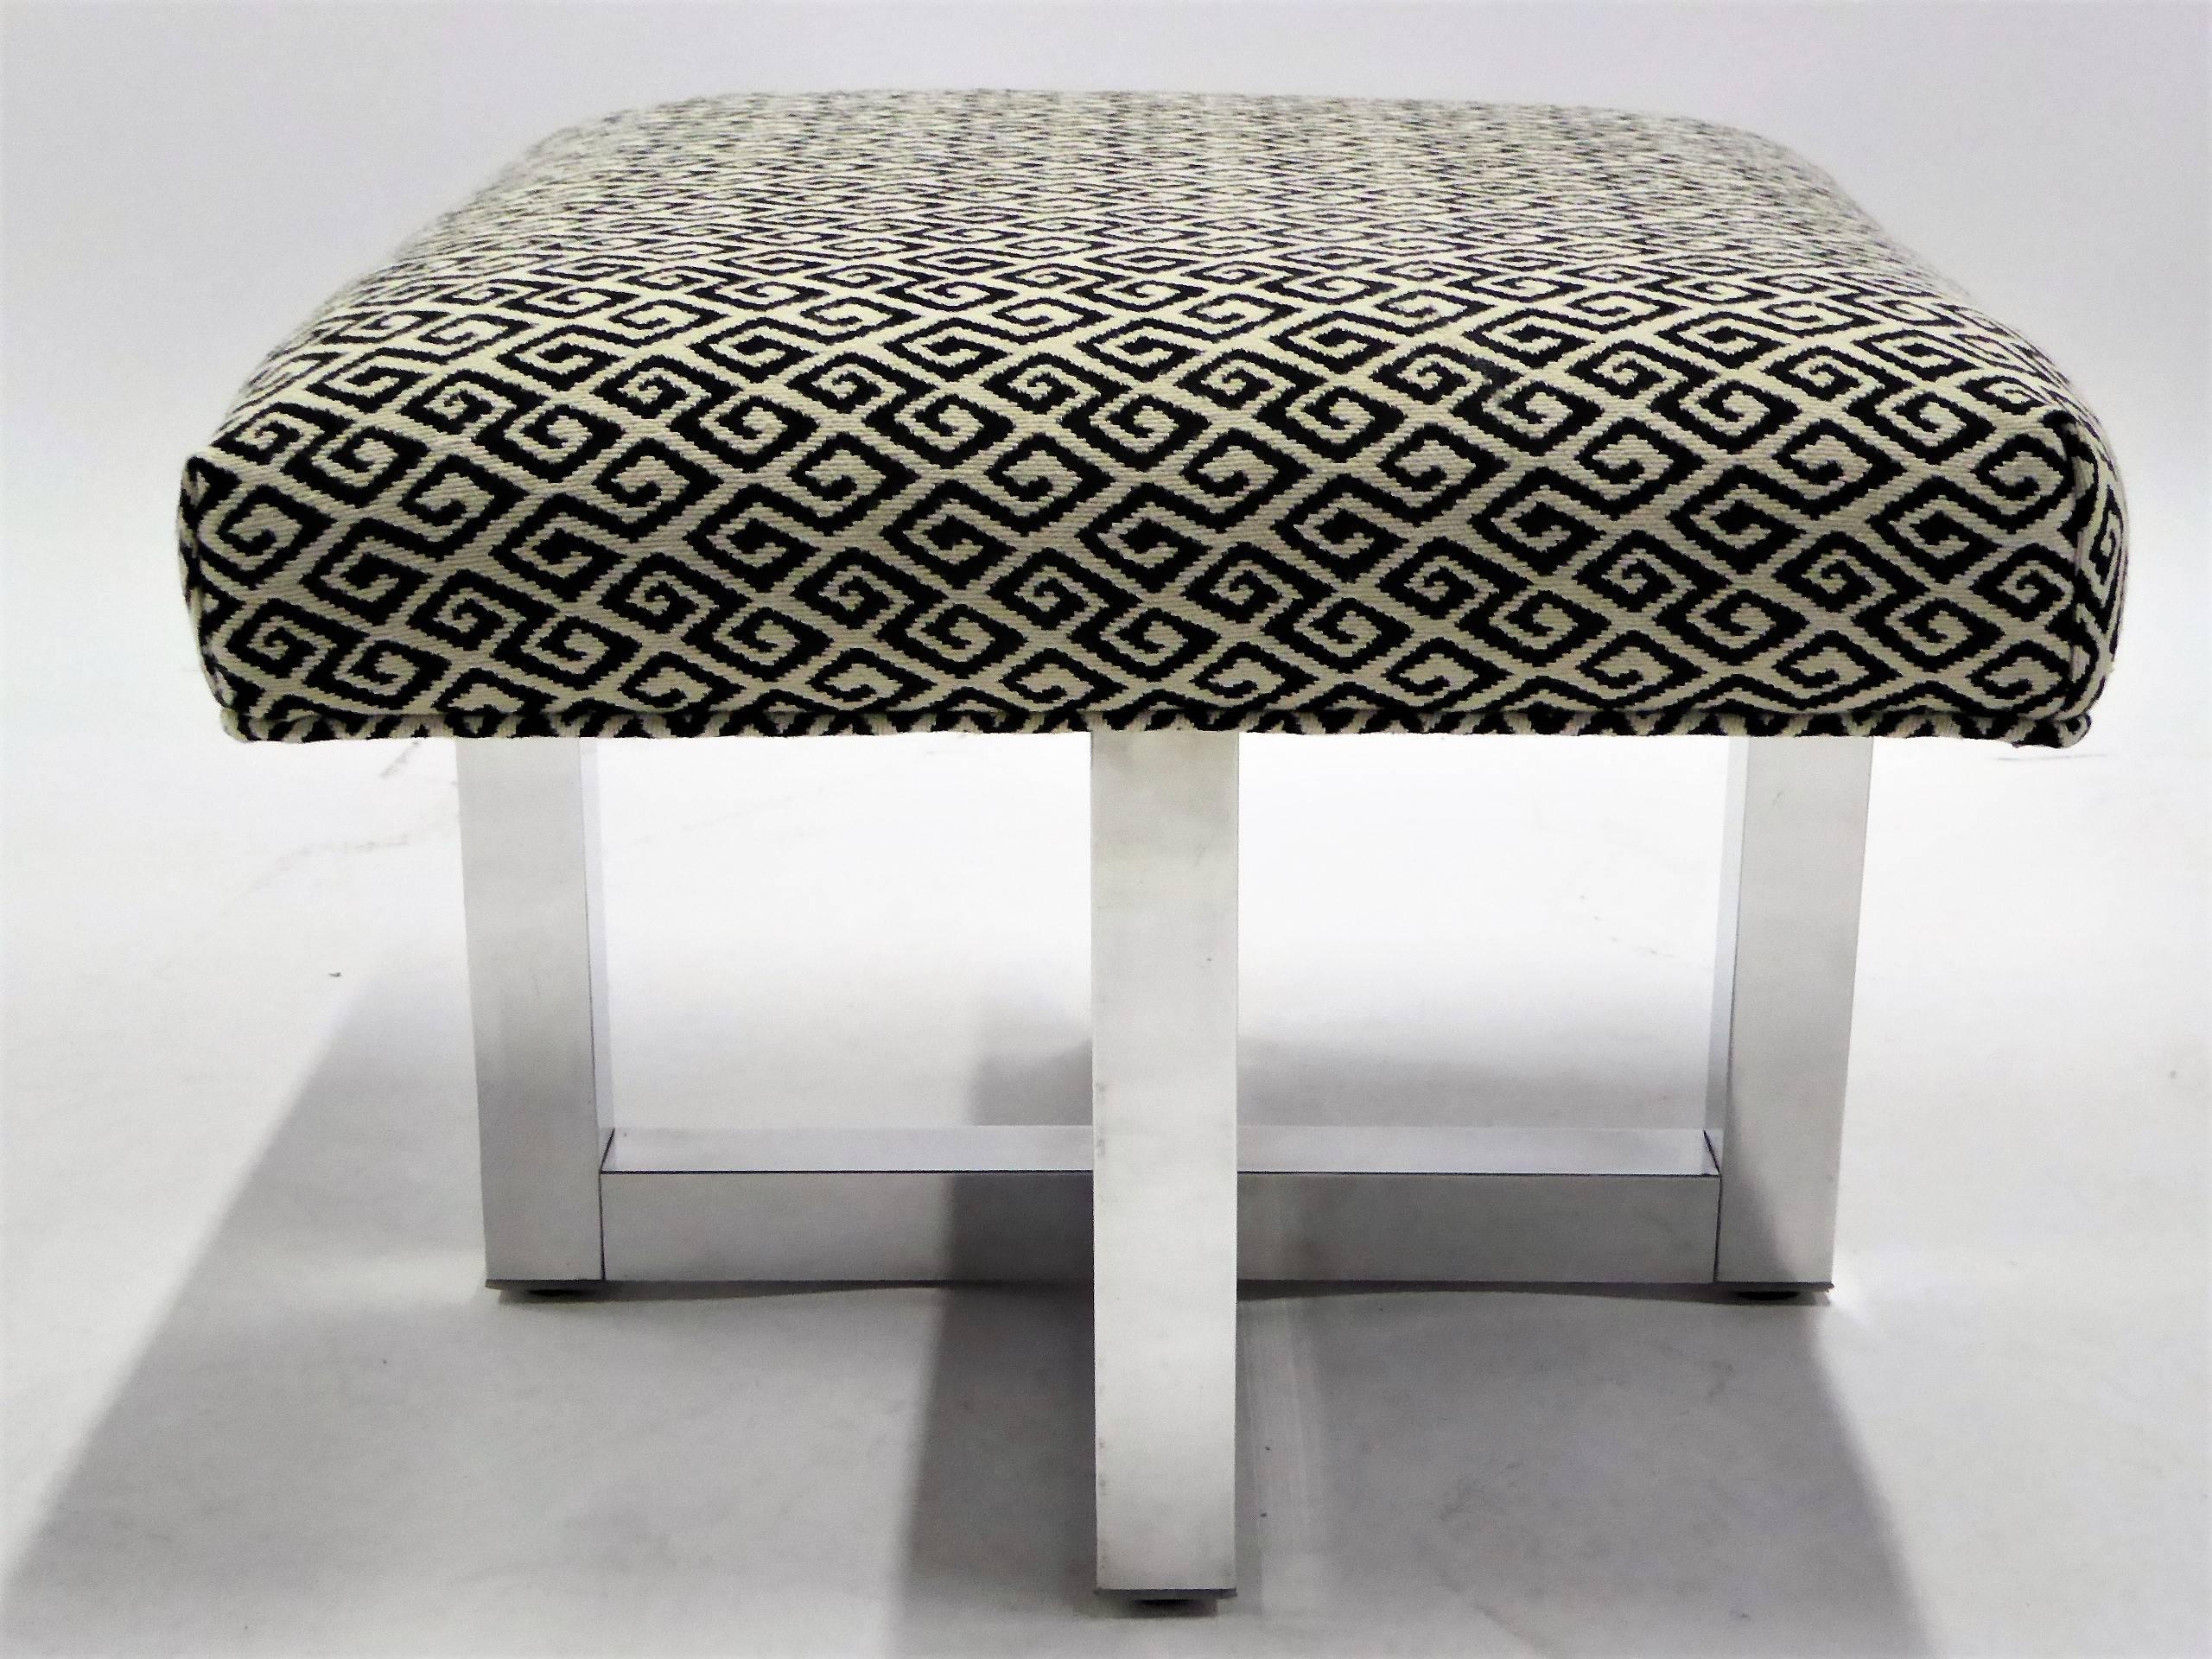 REDUCED FROM $1,500 a PAIR....Offered in pairs, from the 1960s, stools or benches in the style of Milo Baughman. With polished X-aluminum bases with superb upholstered seats in vintage woven wool Meander / Greek Key motif fabric with welting. Sold